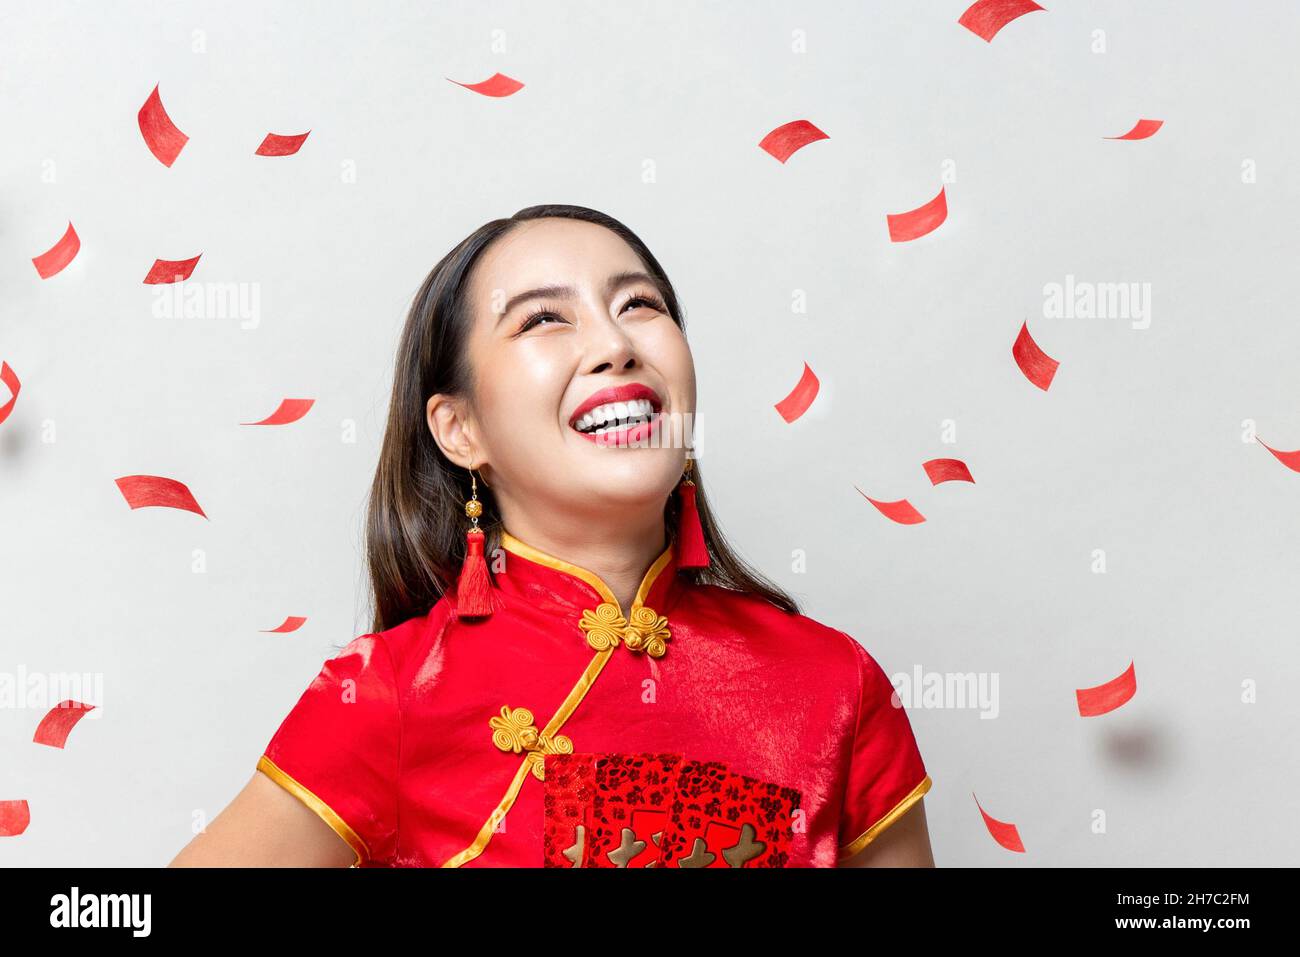 Smiling happy Asian woman in traditional oriental costume looking upward in light gray background with red confetti Stock Photo